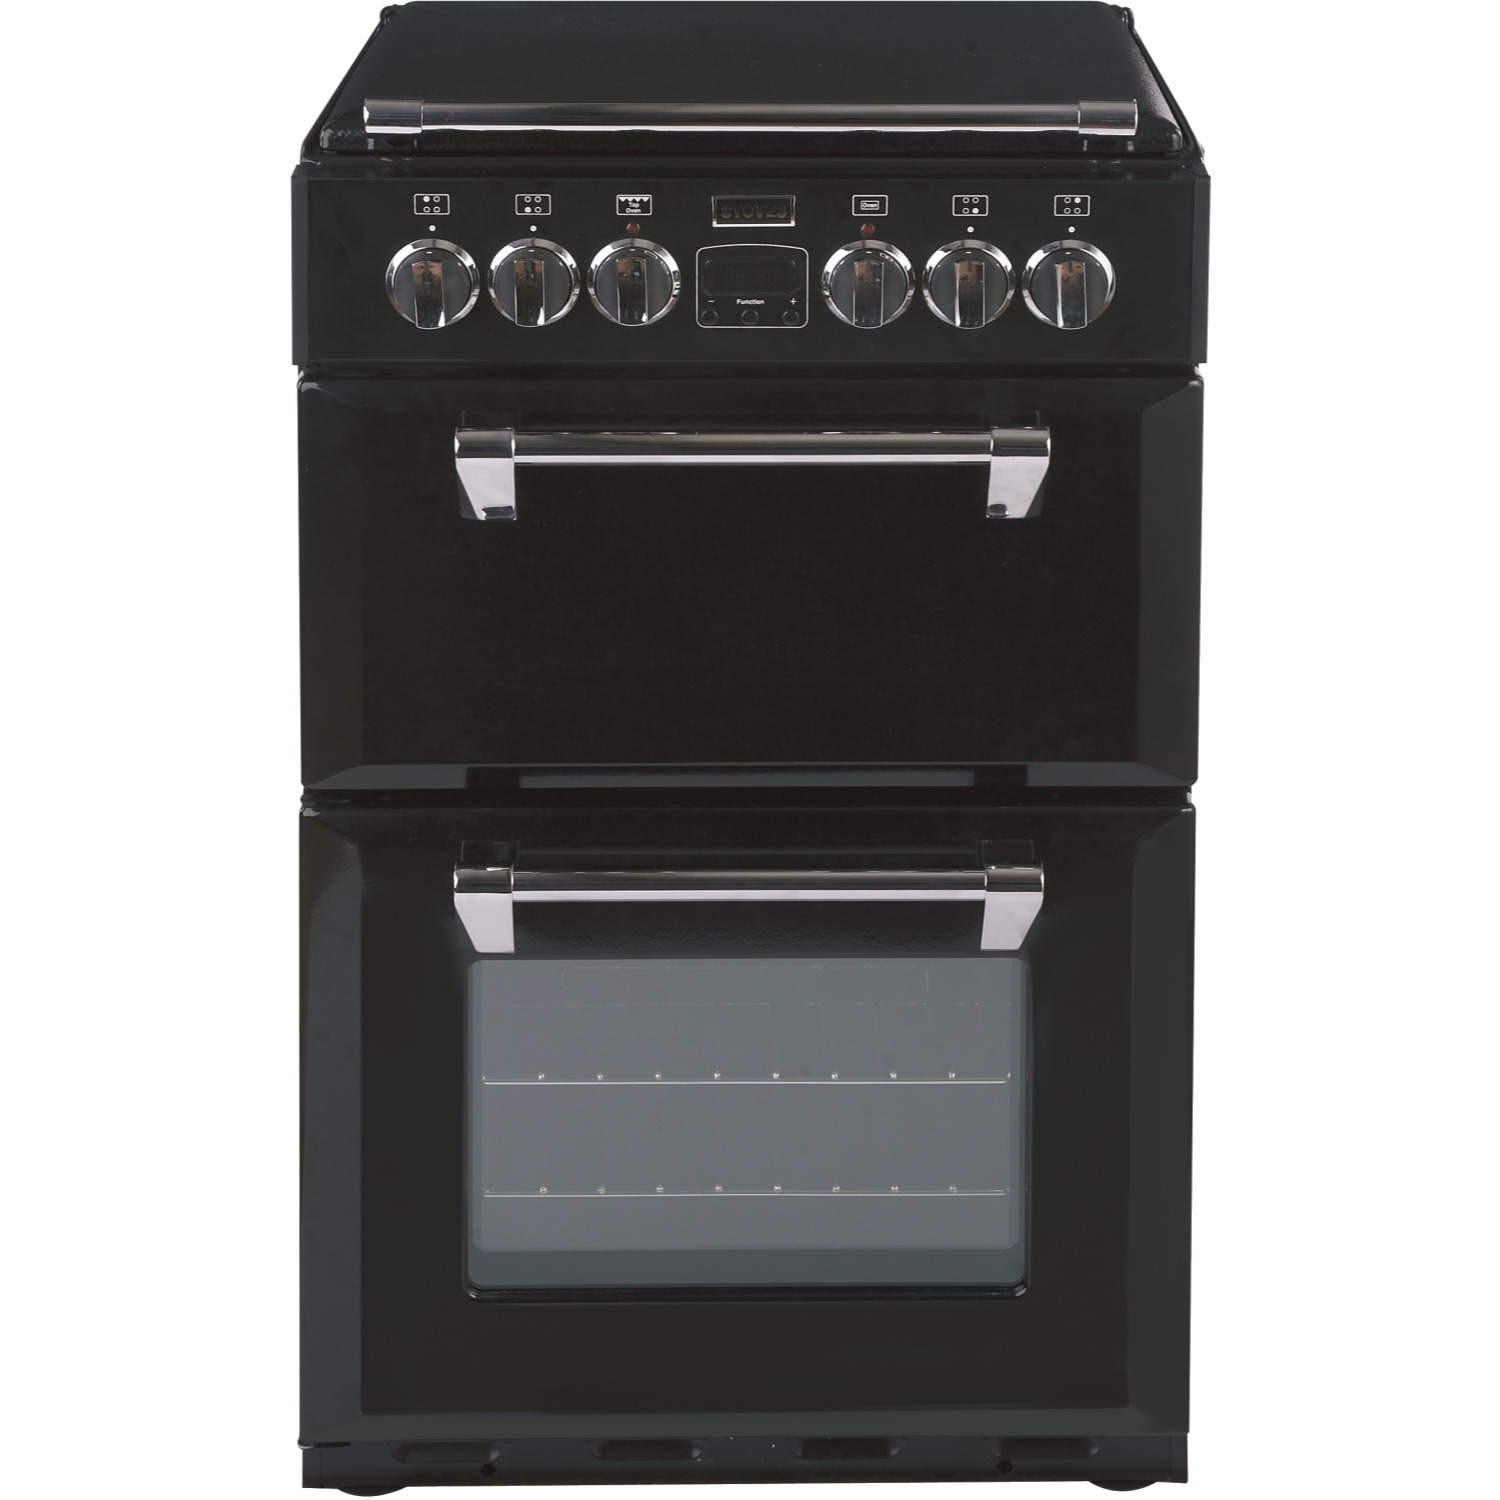 Stoves Richmond 550E 55cm Double Oven Electric Cooker with Ceramic Hob and Lid - Black